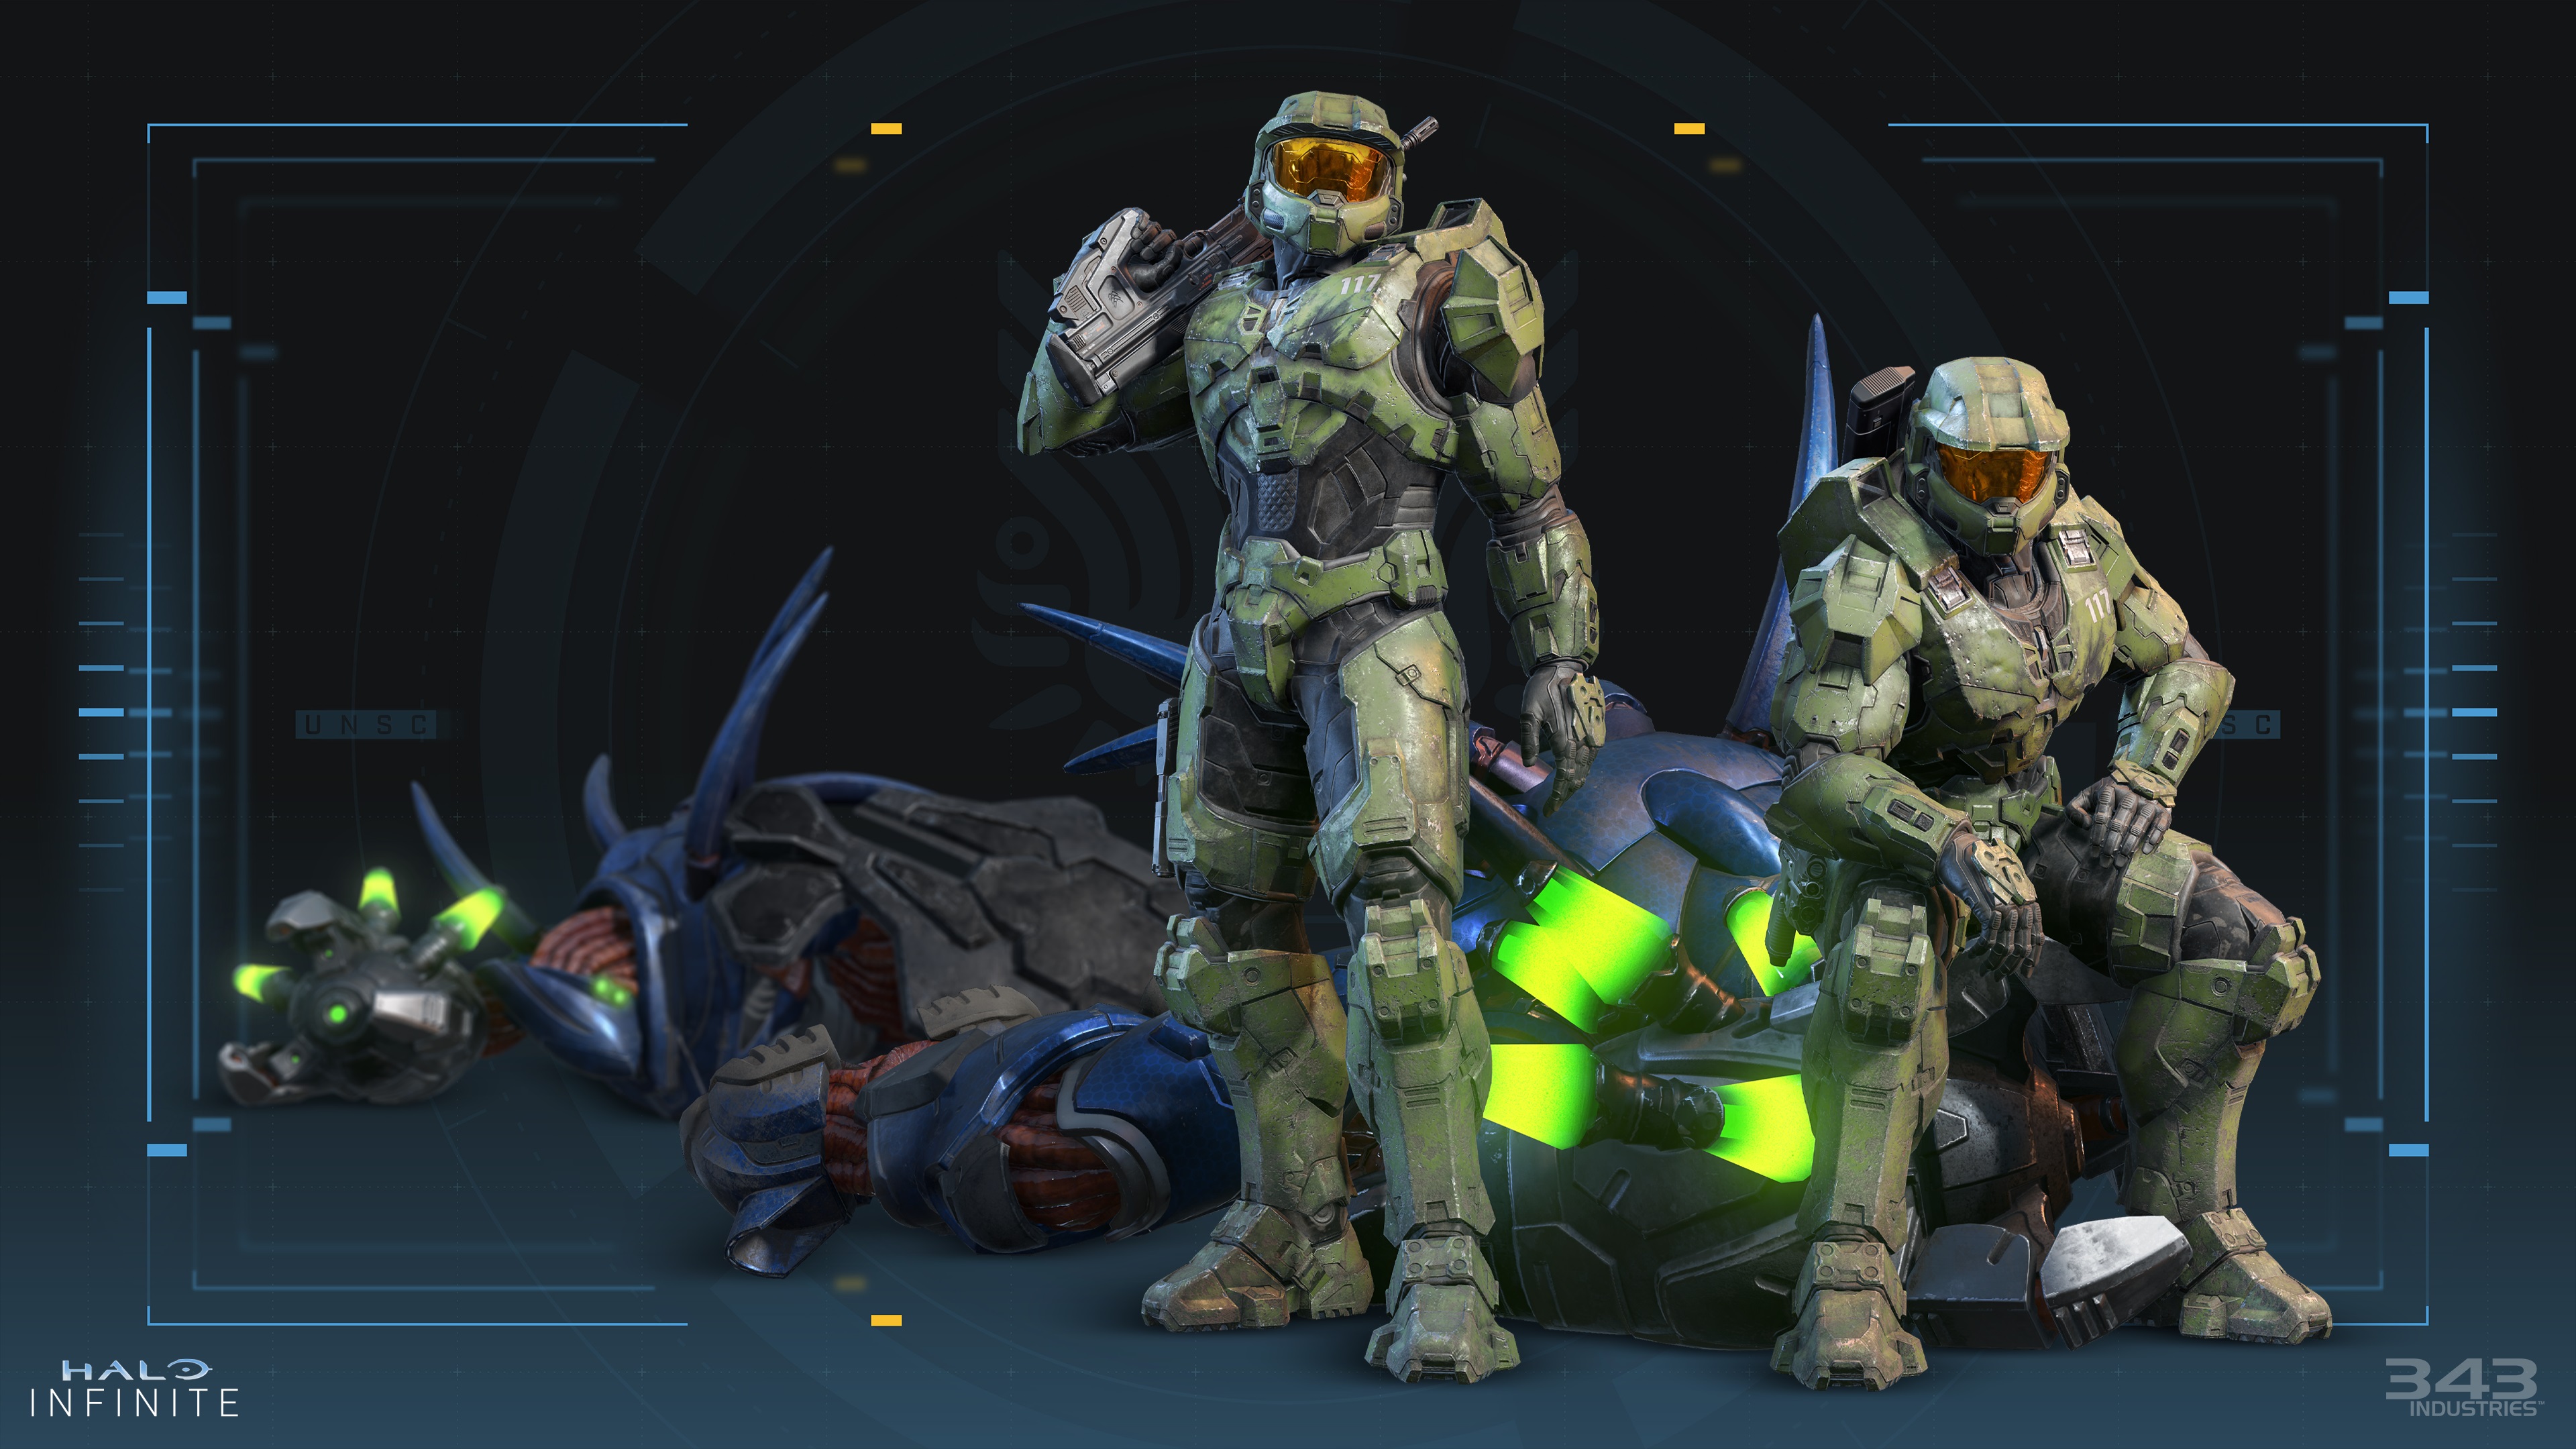 A pair of Master Chiefs, one standing with a gun slung over his shoulder, the other sitting on a fallen enemy, from Halo Infinite